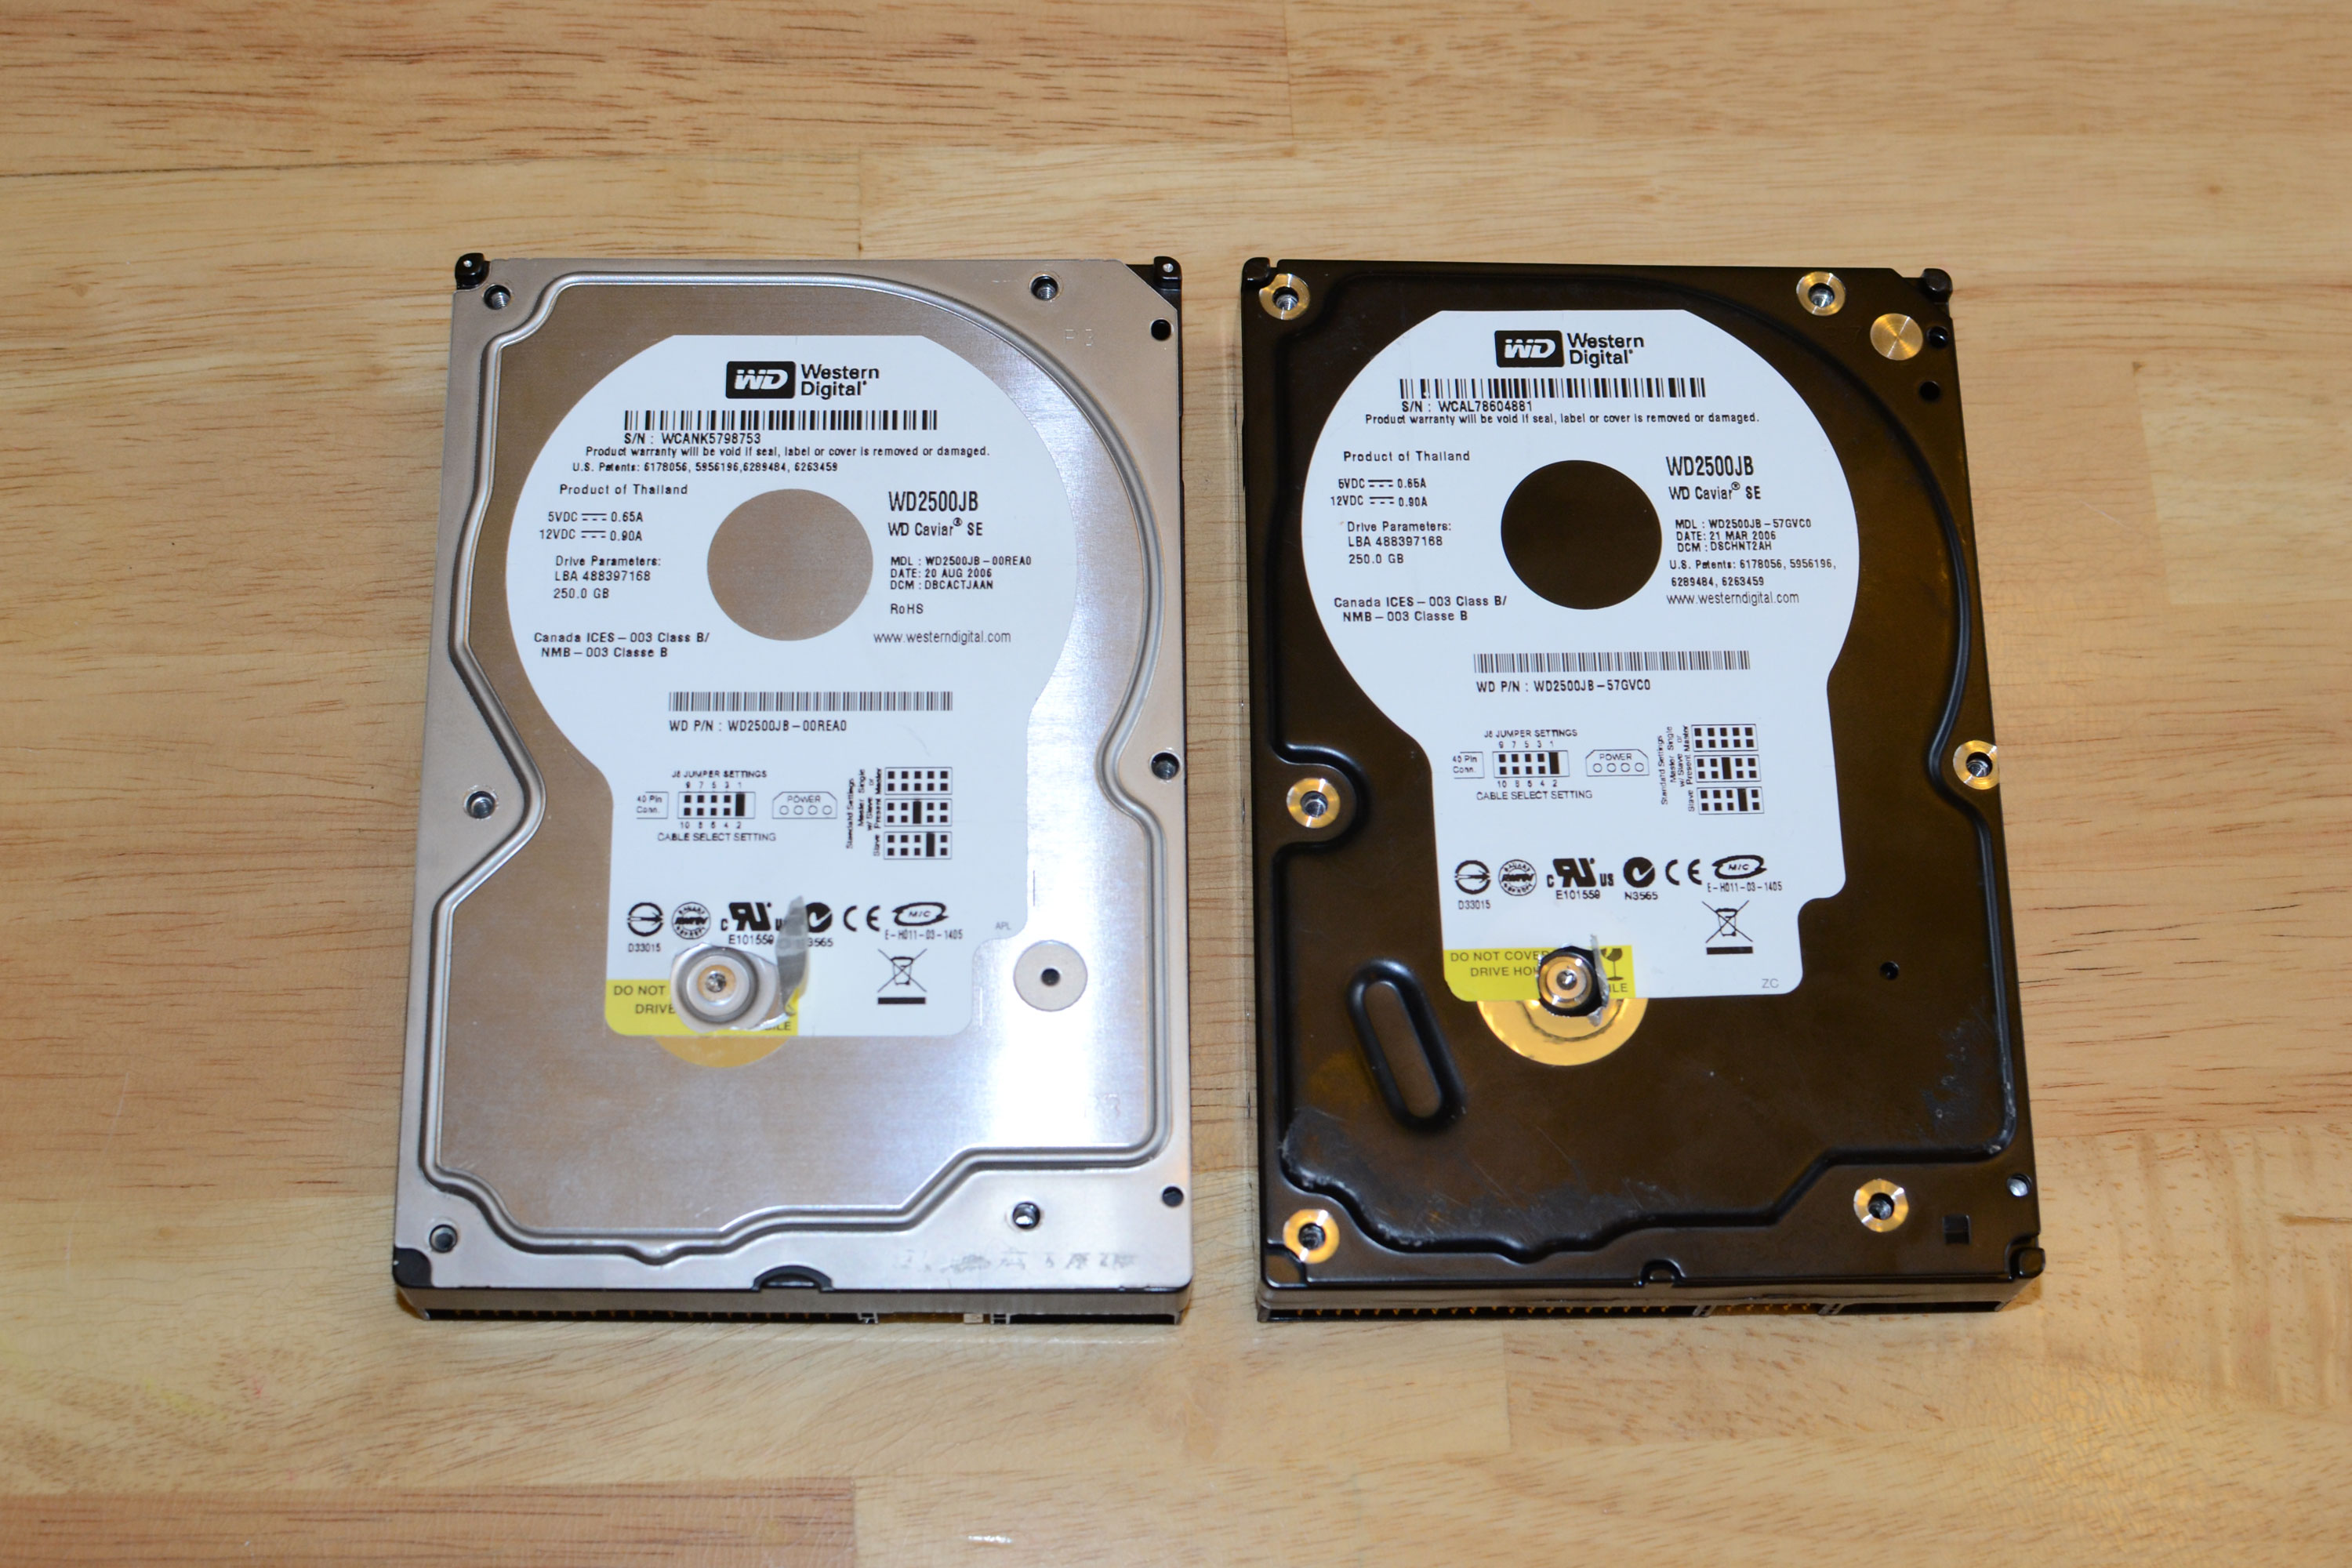 dinosaur auction Significance Hardware Tricks: How to Not Fix a Crashed Hard Drive